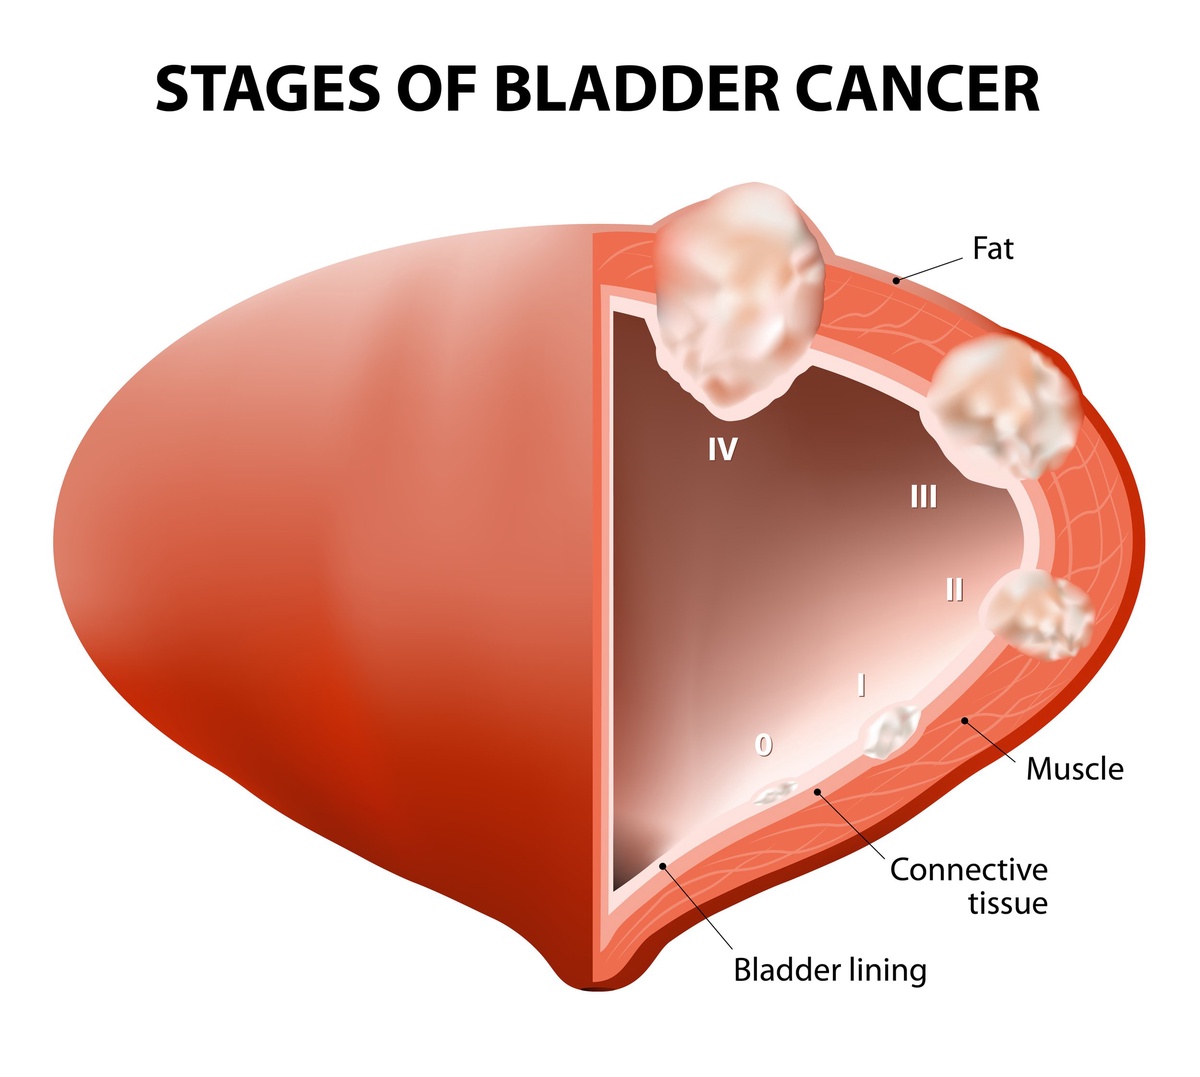 Receive Up-to-date and Effective Treatment from Renowned Bladder Cancer Specialist in Melbourne